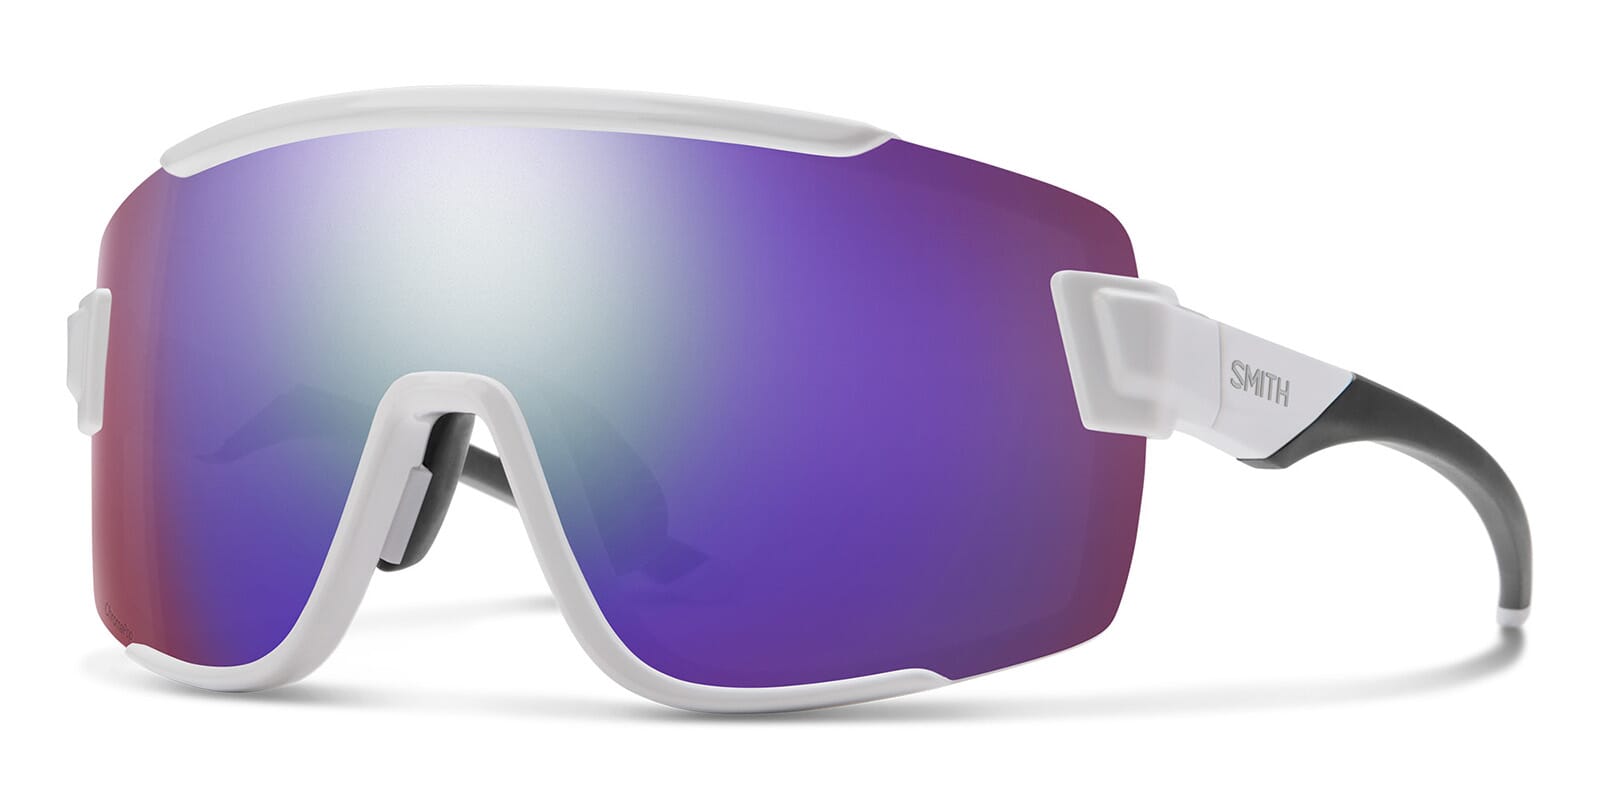 Three quarter view of white Smith Wildcat skiing sunglasses frame with blue and purple tinted lenses